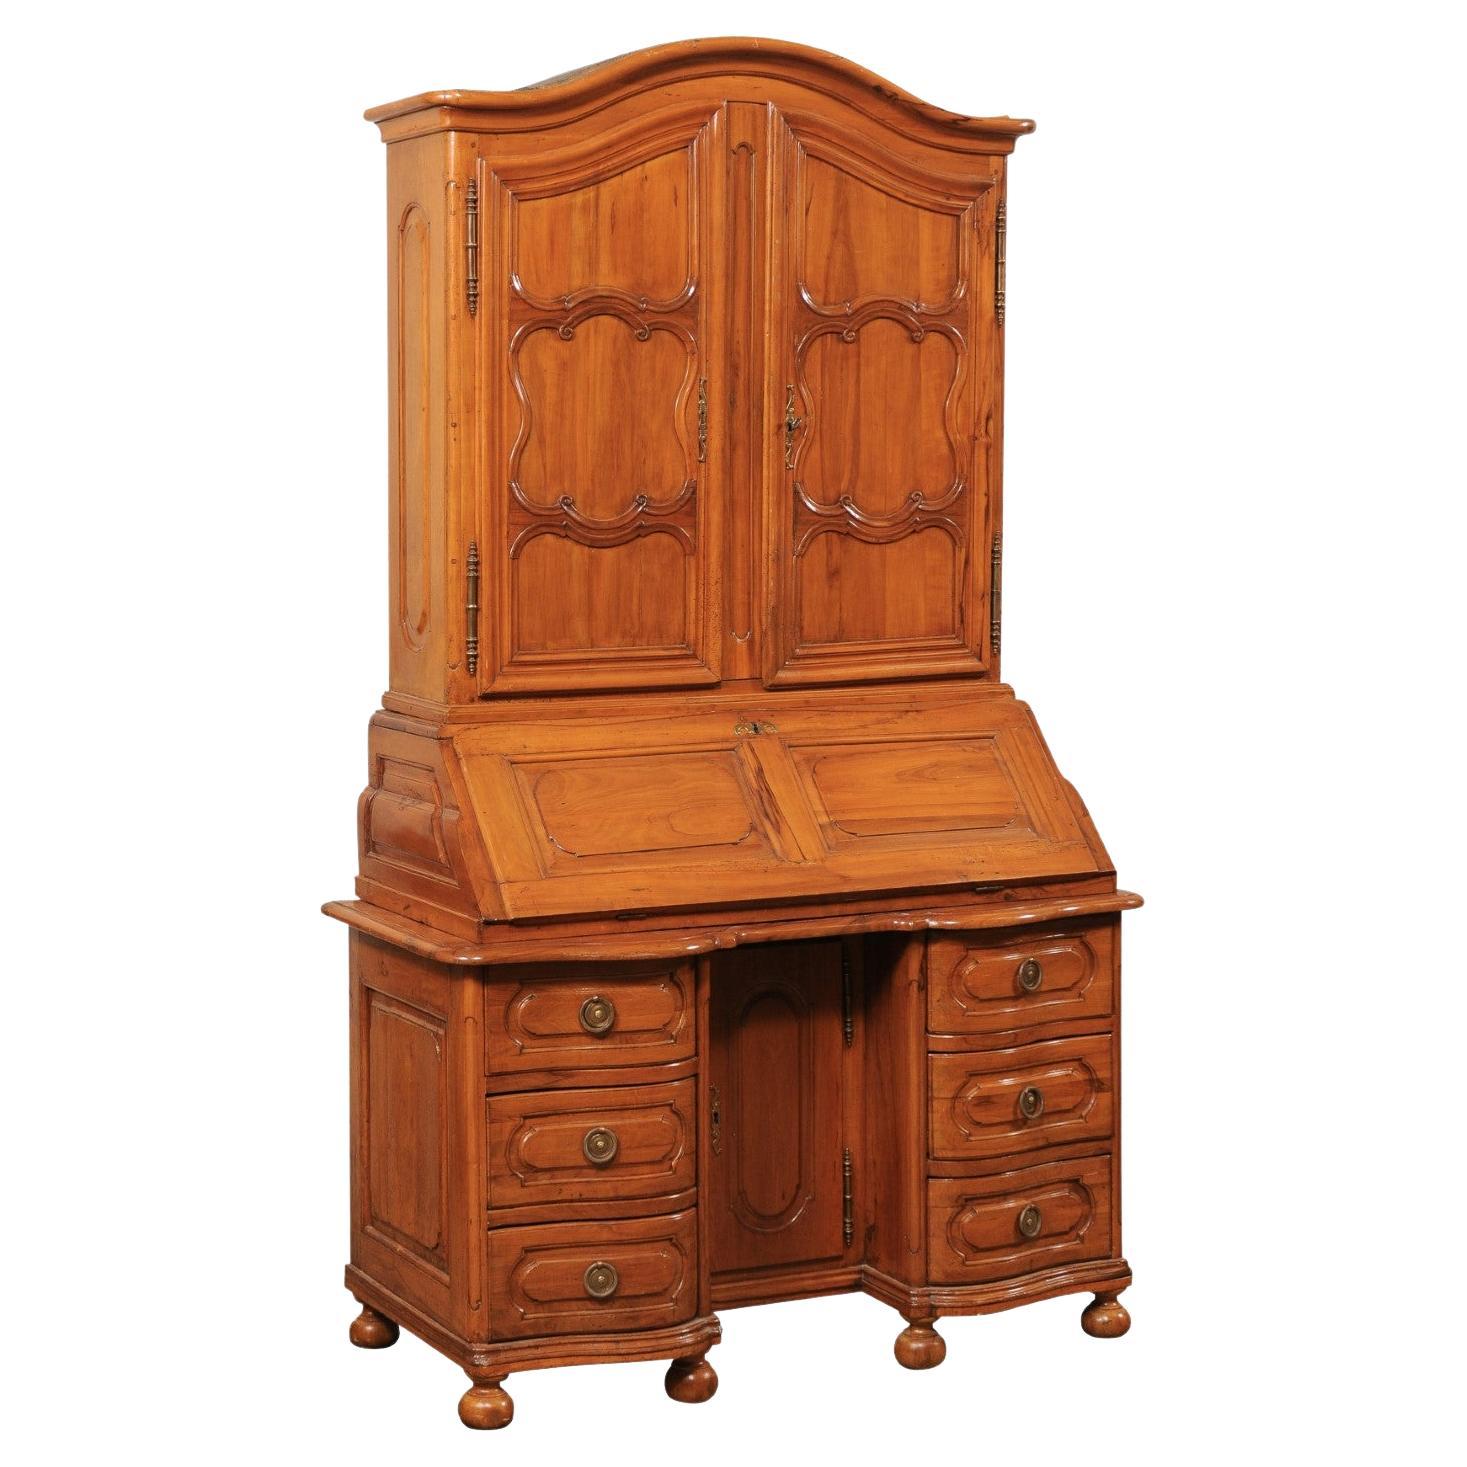 18th C. French Louis XVI Tall Secretaire (Retains Original Leather on Desk-Top) For Sale